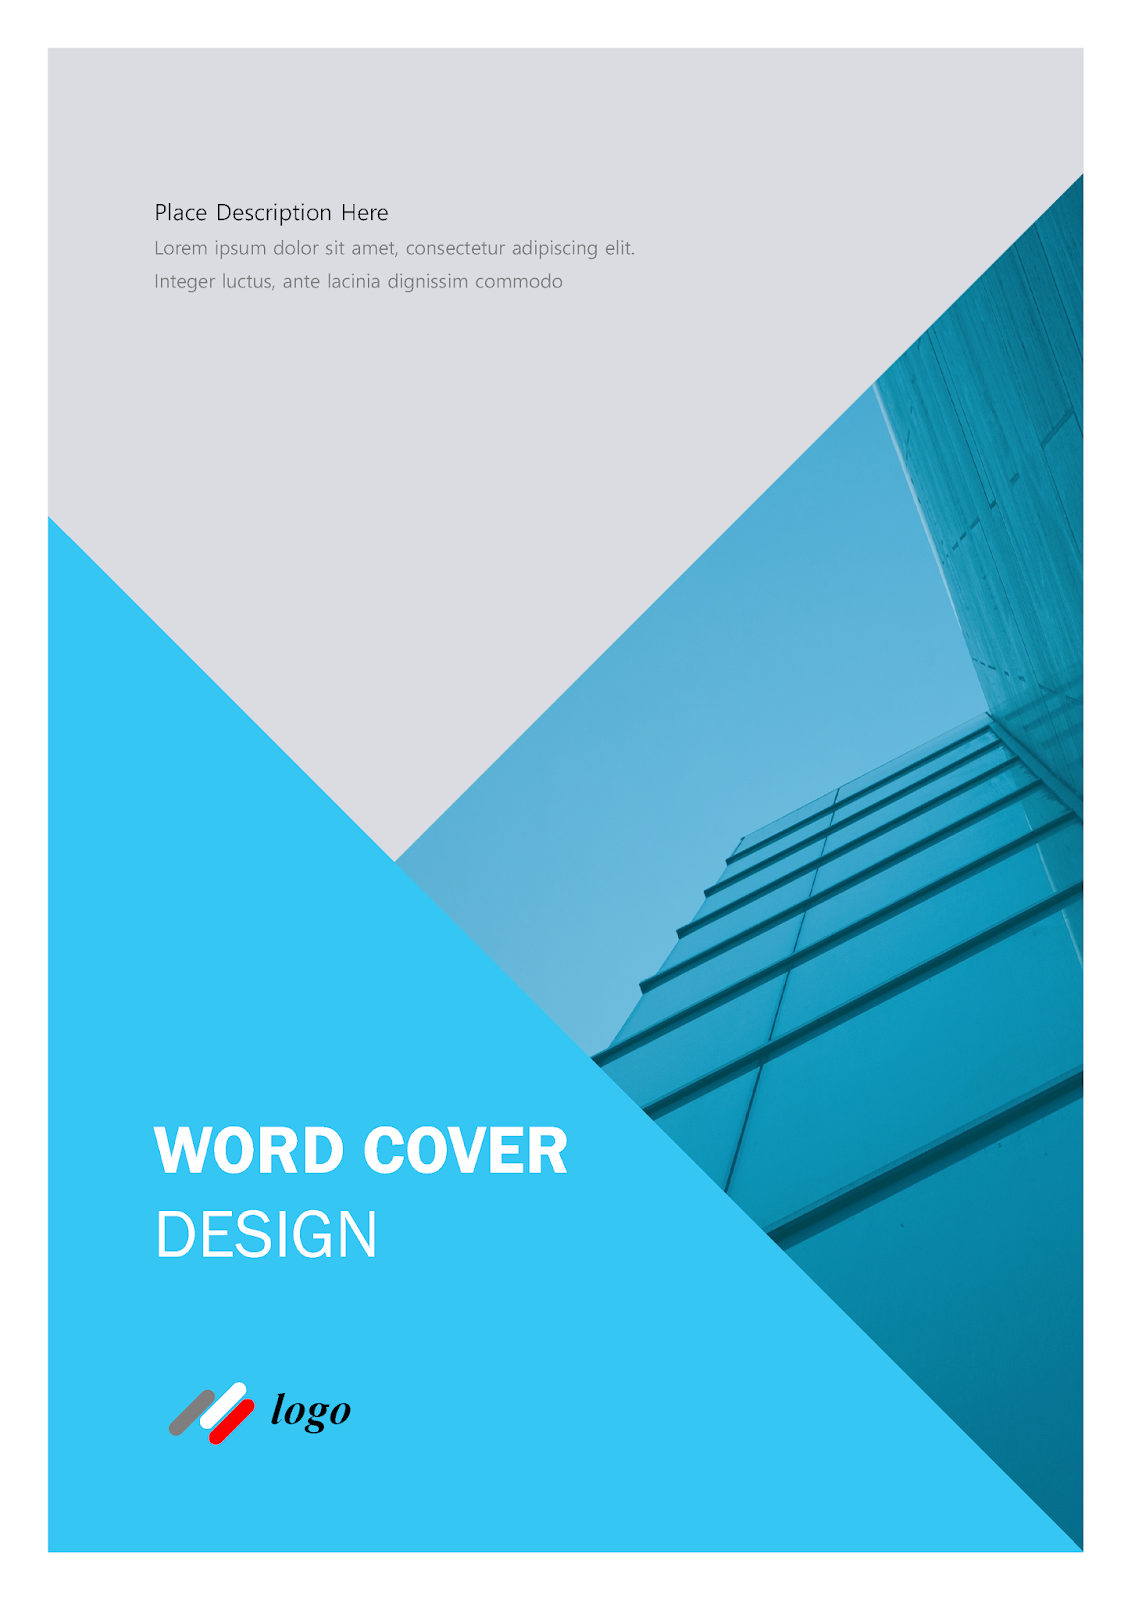 Ms word cover page template designs free download - ffoprealty